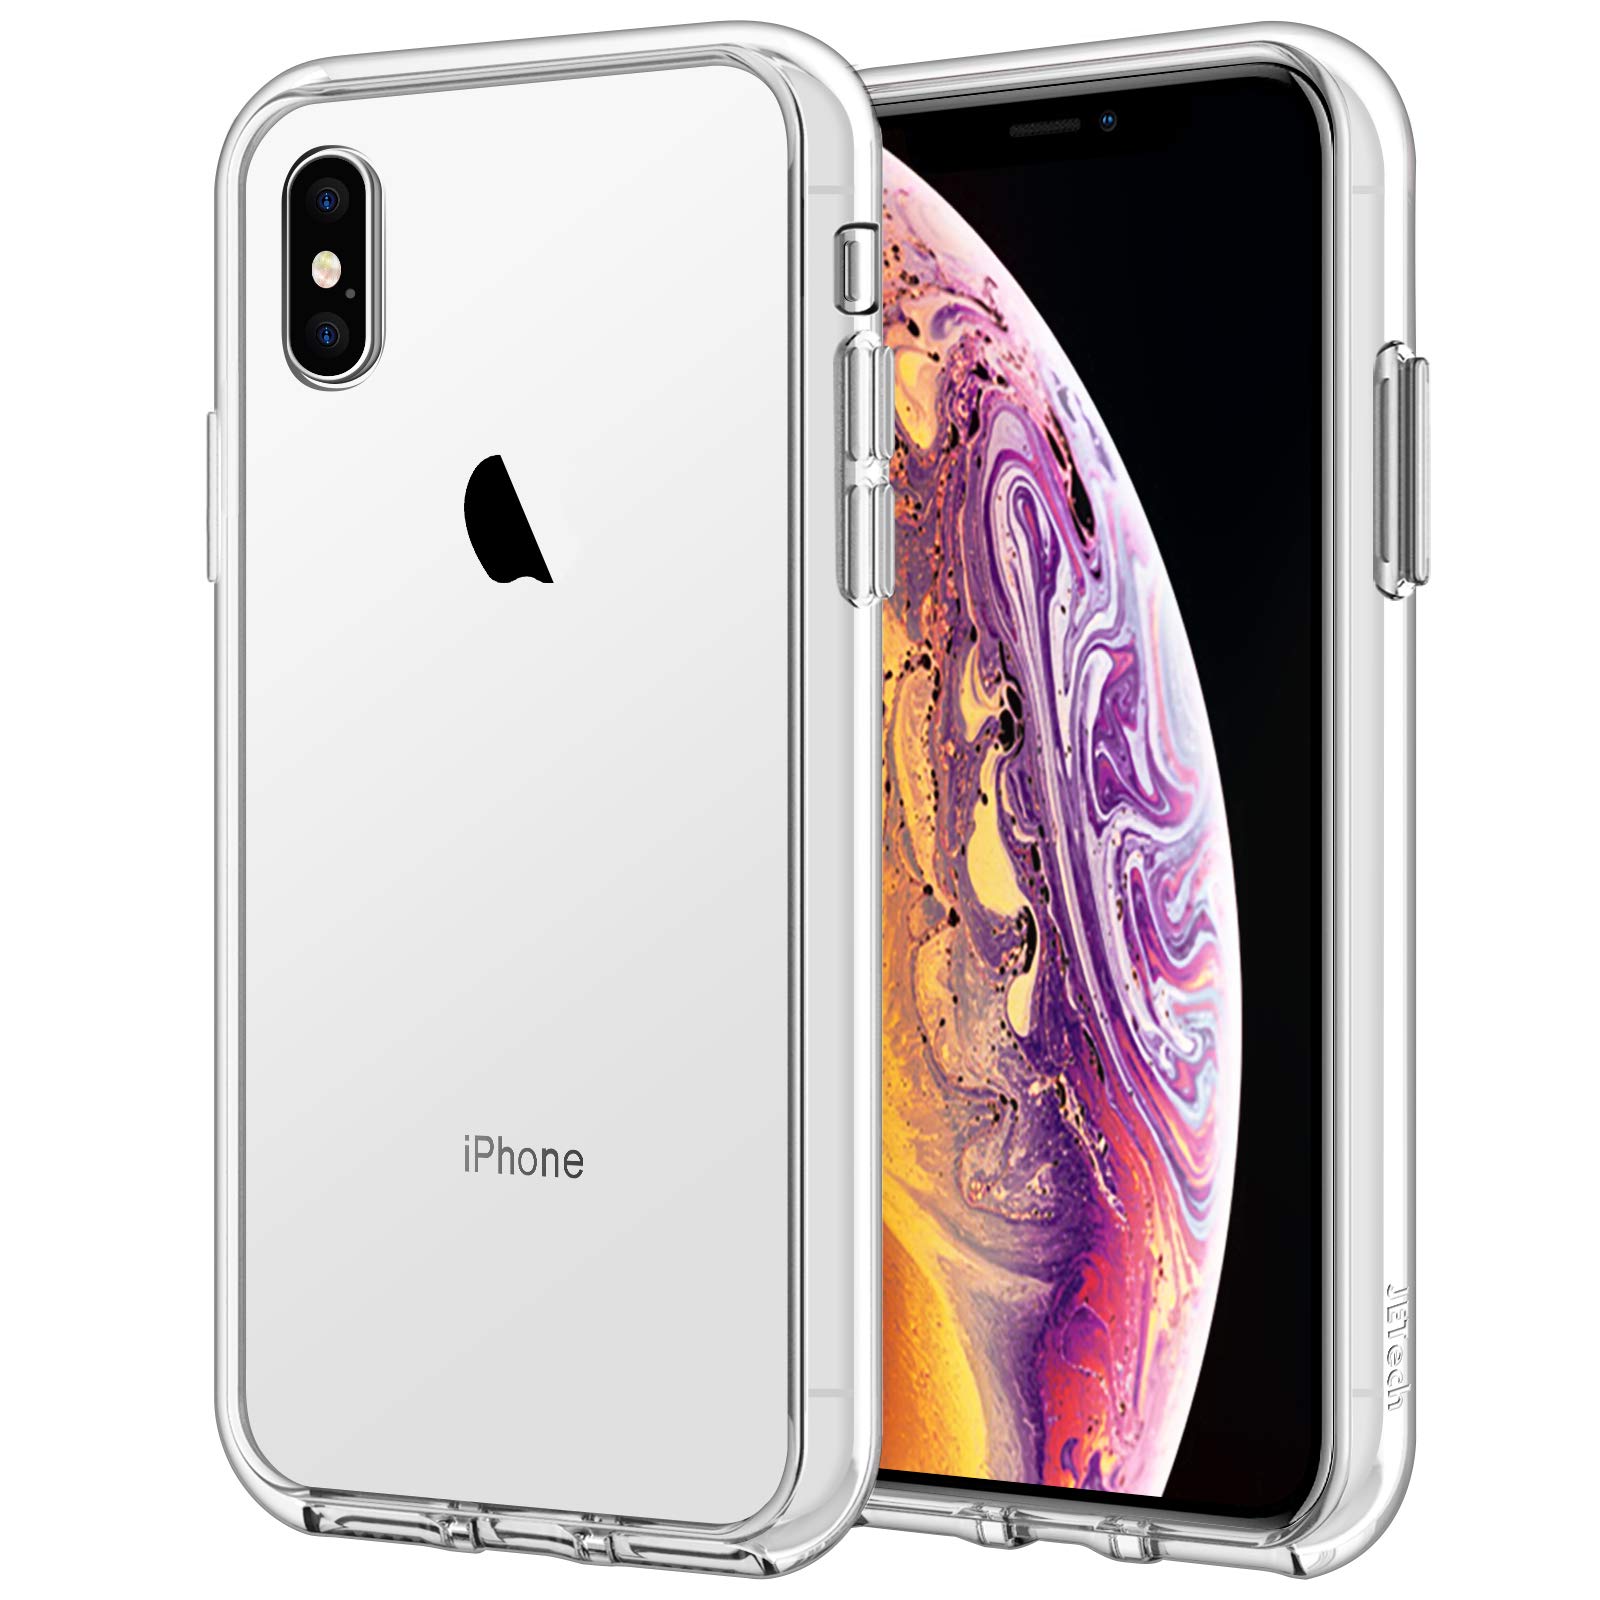 Book Cover JETech Case for iPhone Xs and iPhone X 5.8-Inch, Non-Yellowing Shockproof Phone Bumper Cover, Anti-Scratch Clear Back (Clear)